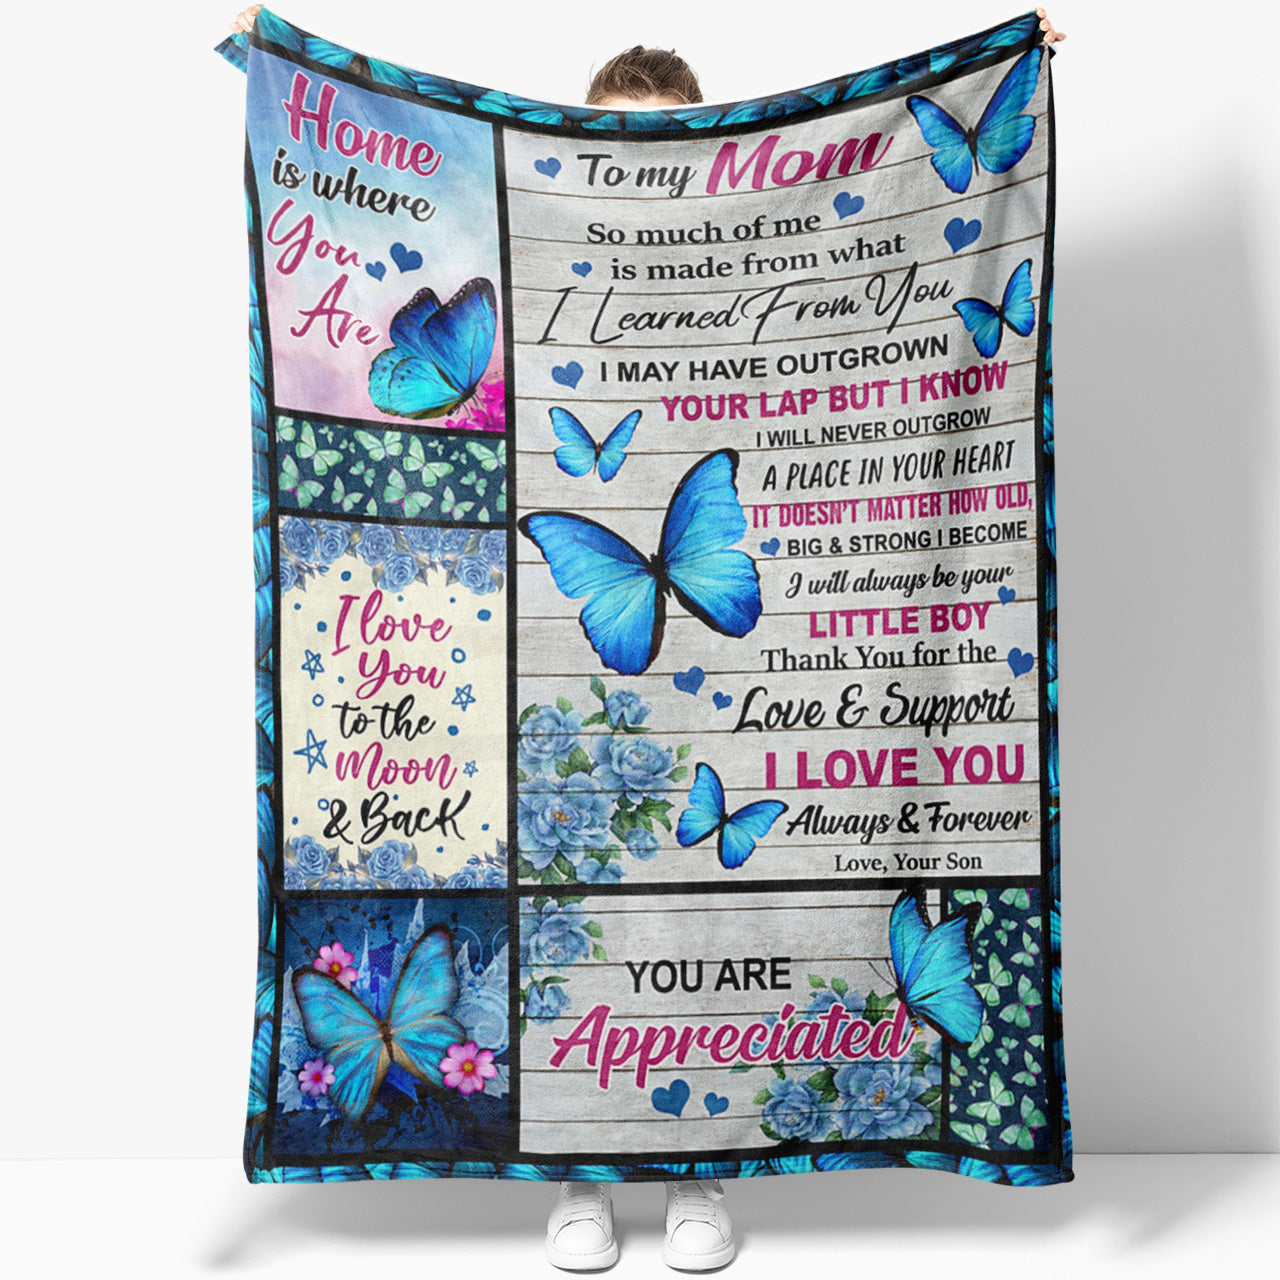 Home is Where Mom Is - Christmas Gift for Mom-Mothers Day Gift-Mom  Gift-Present for